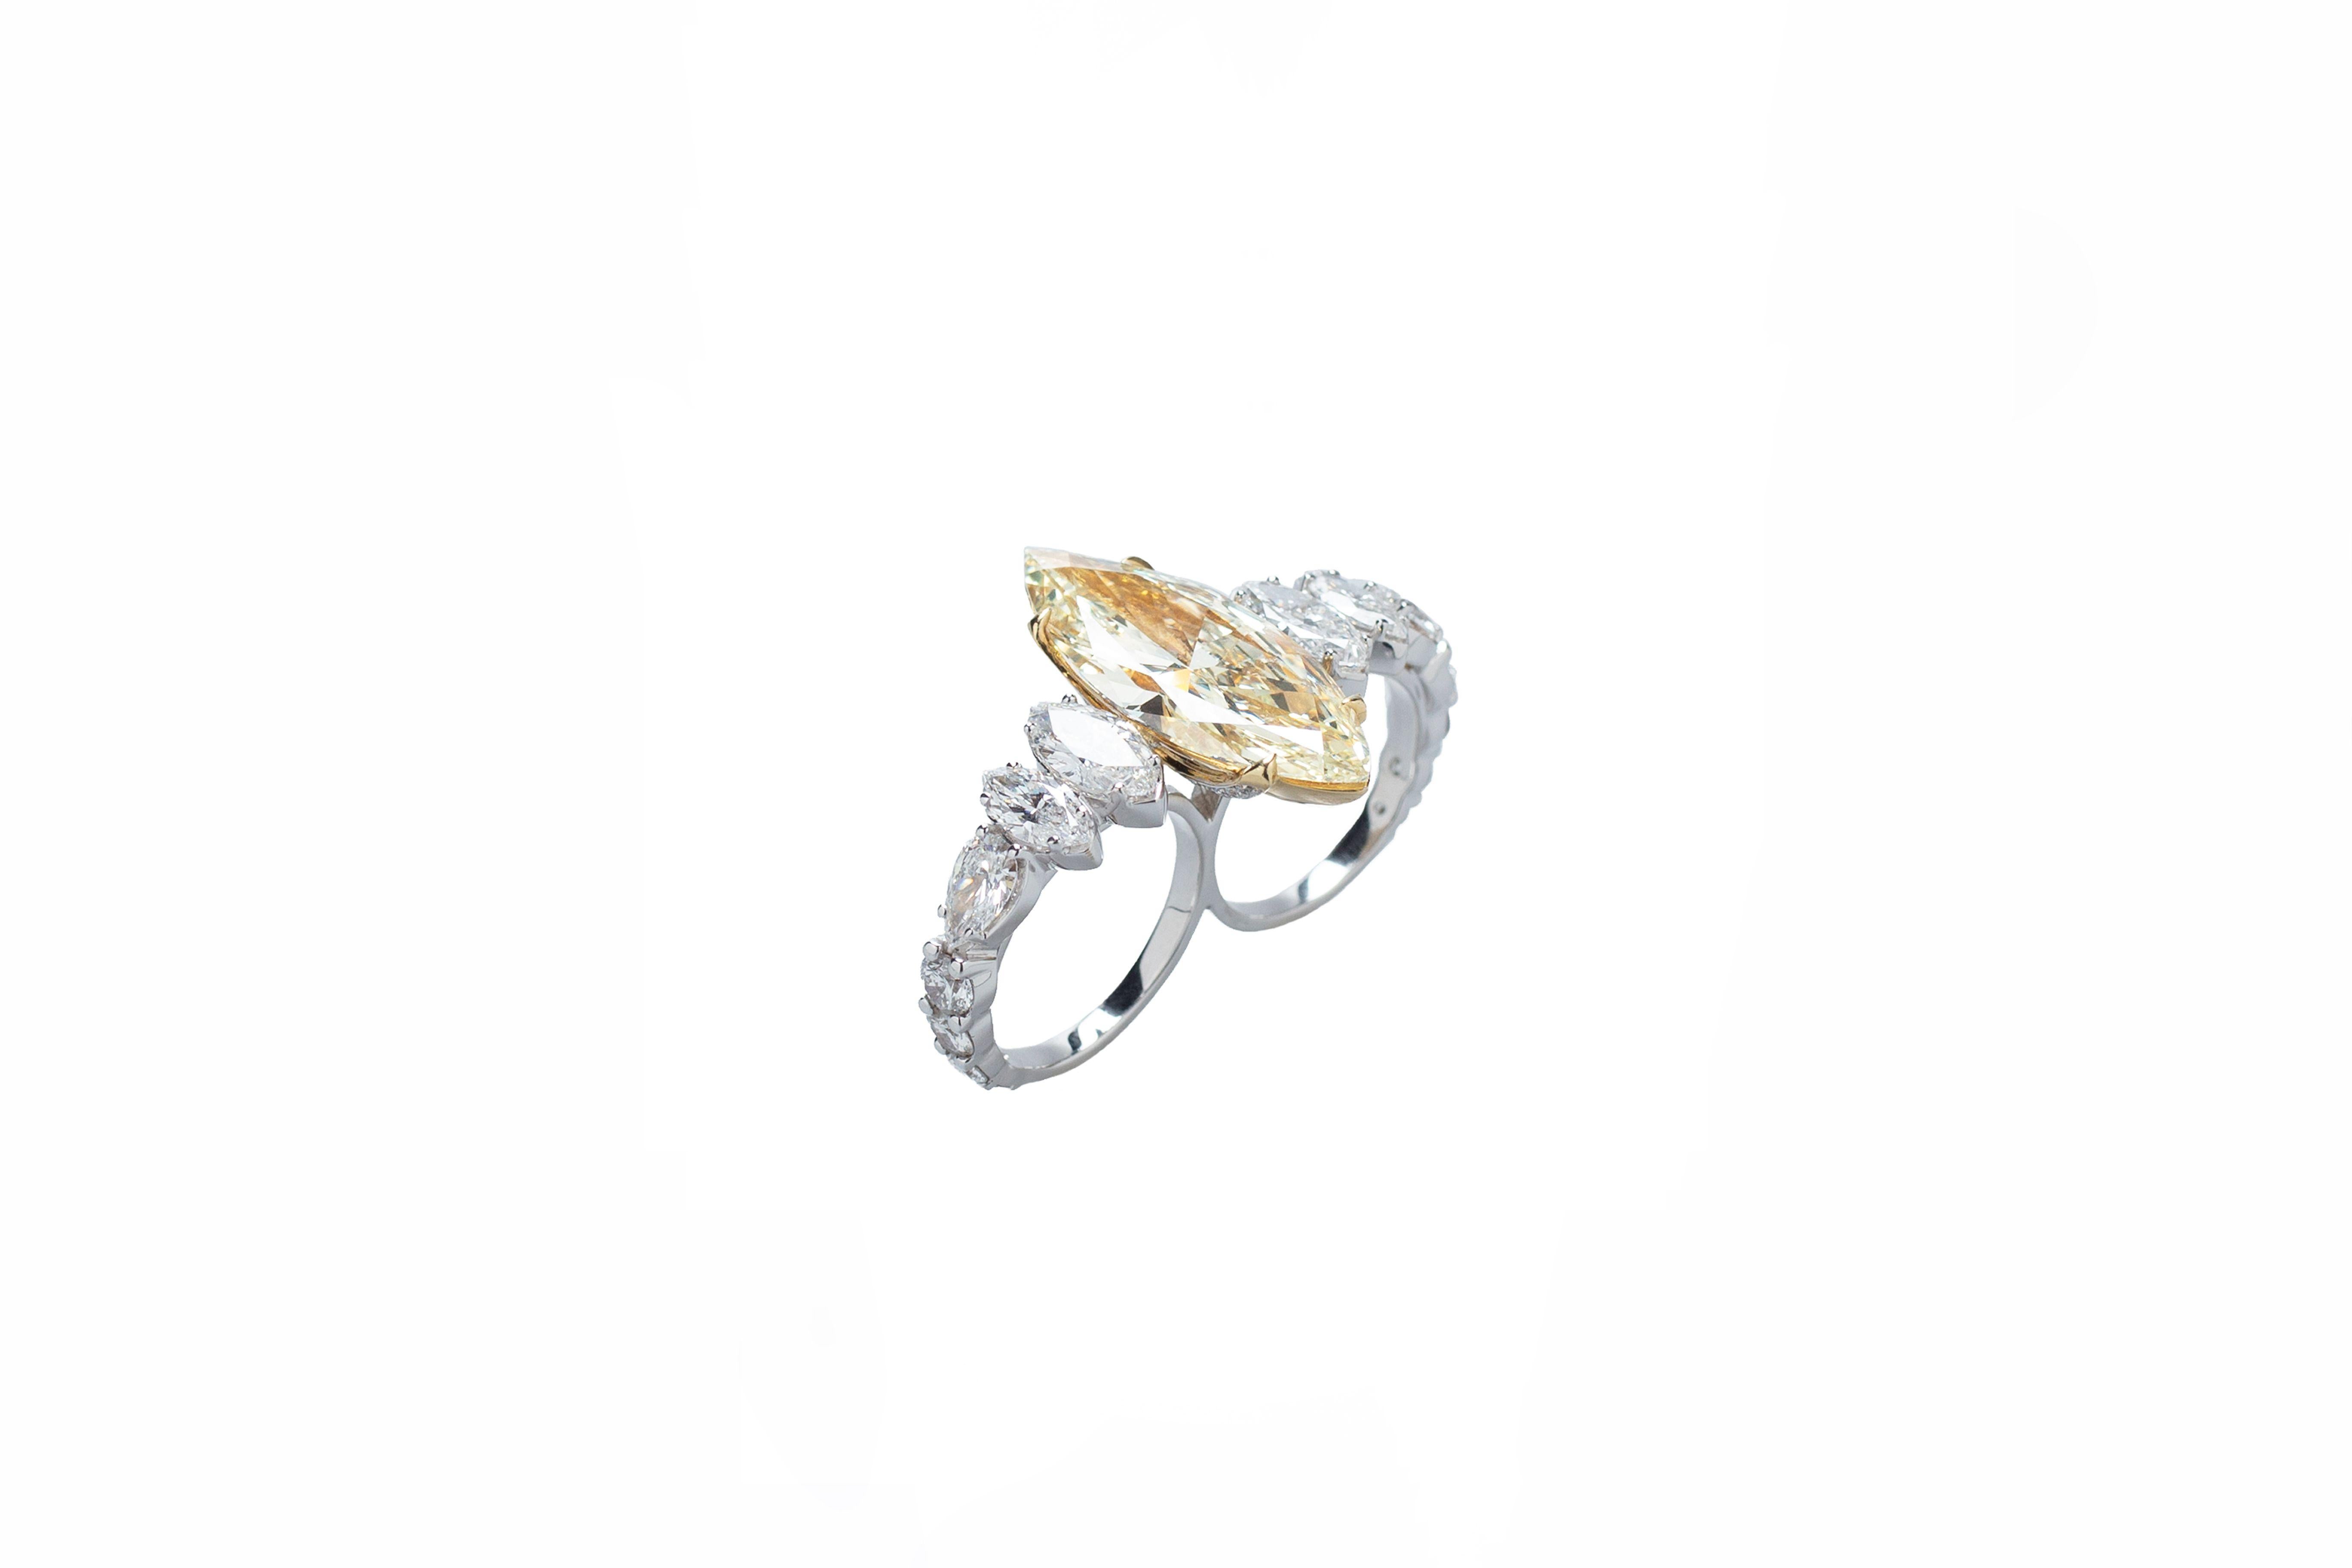 Designed exclusively by Ara Vartanian, this 18k White Gold two finger Ring features a Fancy Light Yellow Diamond  in a navette cut, weighing 11,78ct (eleven carats and seventy-eight points) , along with 5.45ct (five carats and forty-five points)